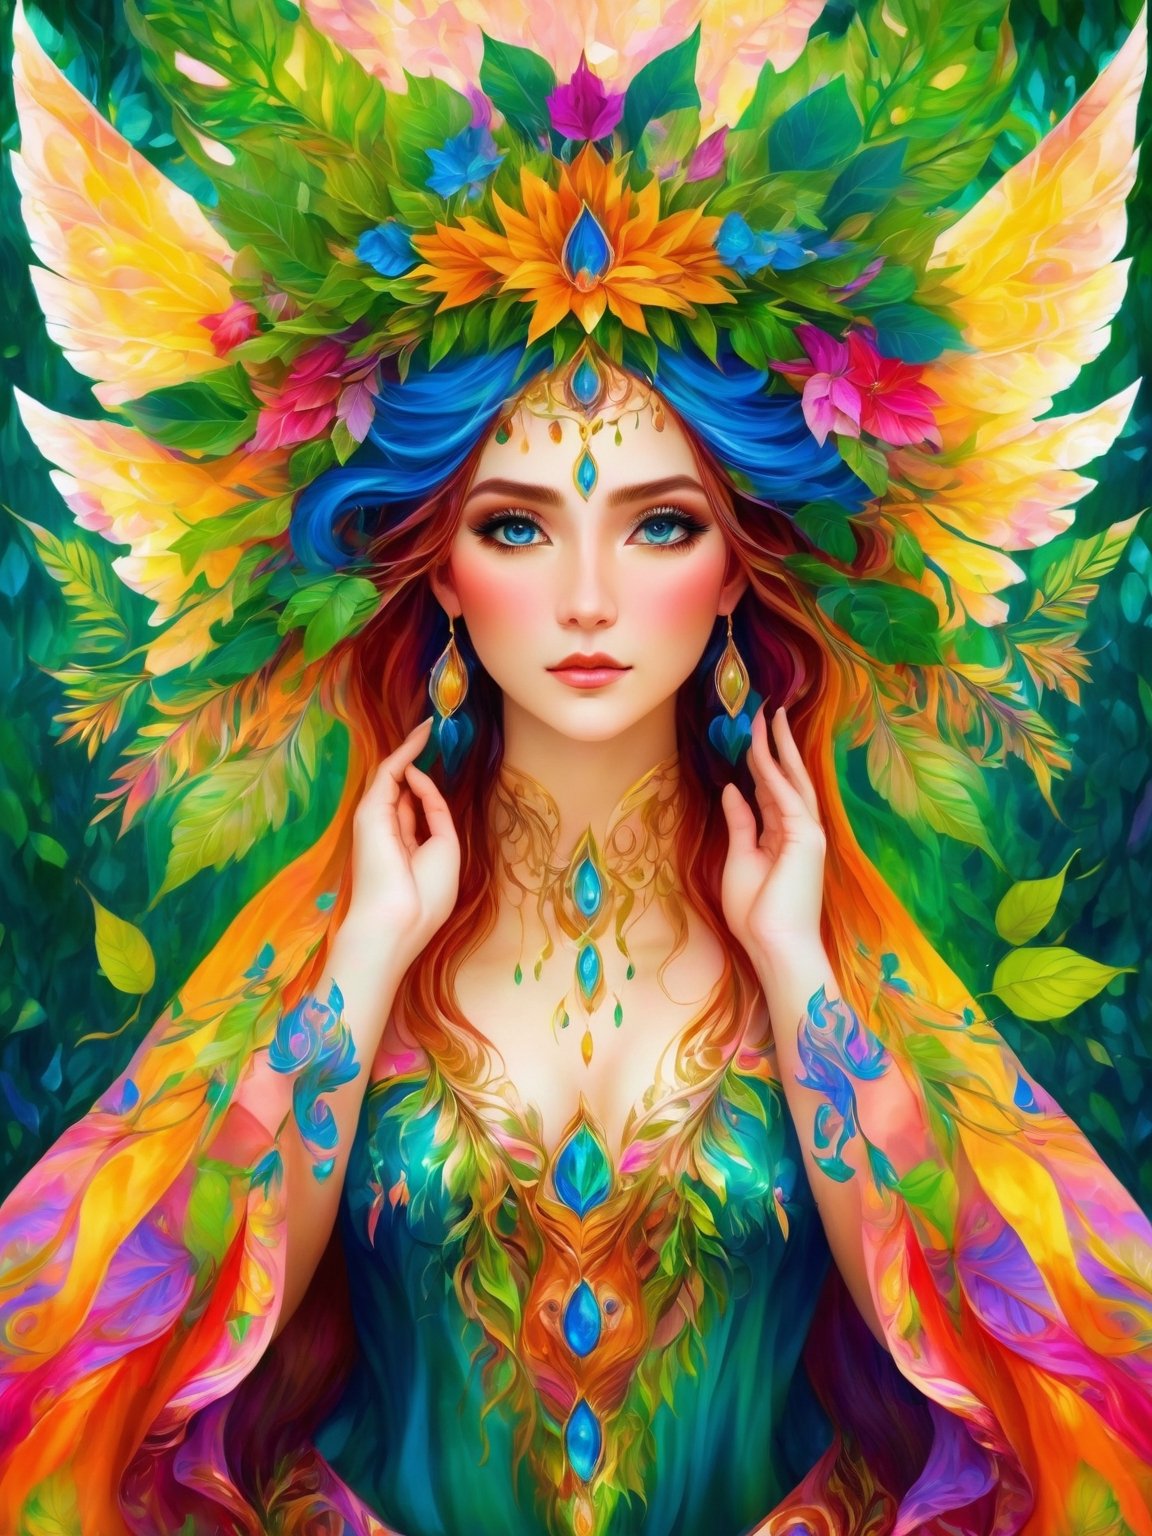 (best quality, 8K, highres, masterpiece:1.2), ultra-detailed, (fantasy creature, mythical being, otherworldly:1.3), nature goddess transformed into a fantastical creature with a body made of vibrant, swirling leaves and petals. This enchanting portrait captures her amidst a lush greenery filled with wildflowers of every color. Her eyes are a breathtaking kaleidoscope, and she wears a serene expression that radiates ethereal beauty. In a graceful and dynamic pose, she moves with the wind, her luminous skin glowing in the soft, natural light filtering through the canopy above. Her flowing hair and an elegant crown of leaves enhance her mythical essence. The vibrant colors of her being create a surreal atmosphere, and a dreamlike aura surrounds her, signifying her harmonious connection with the mystical, enchanted forest.